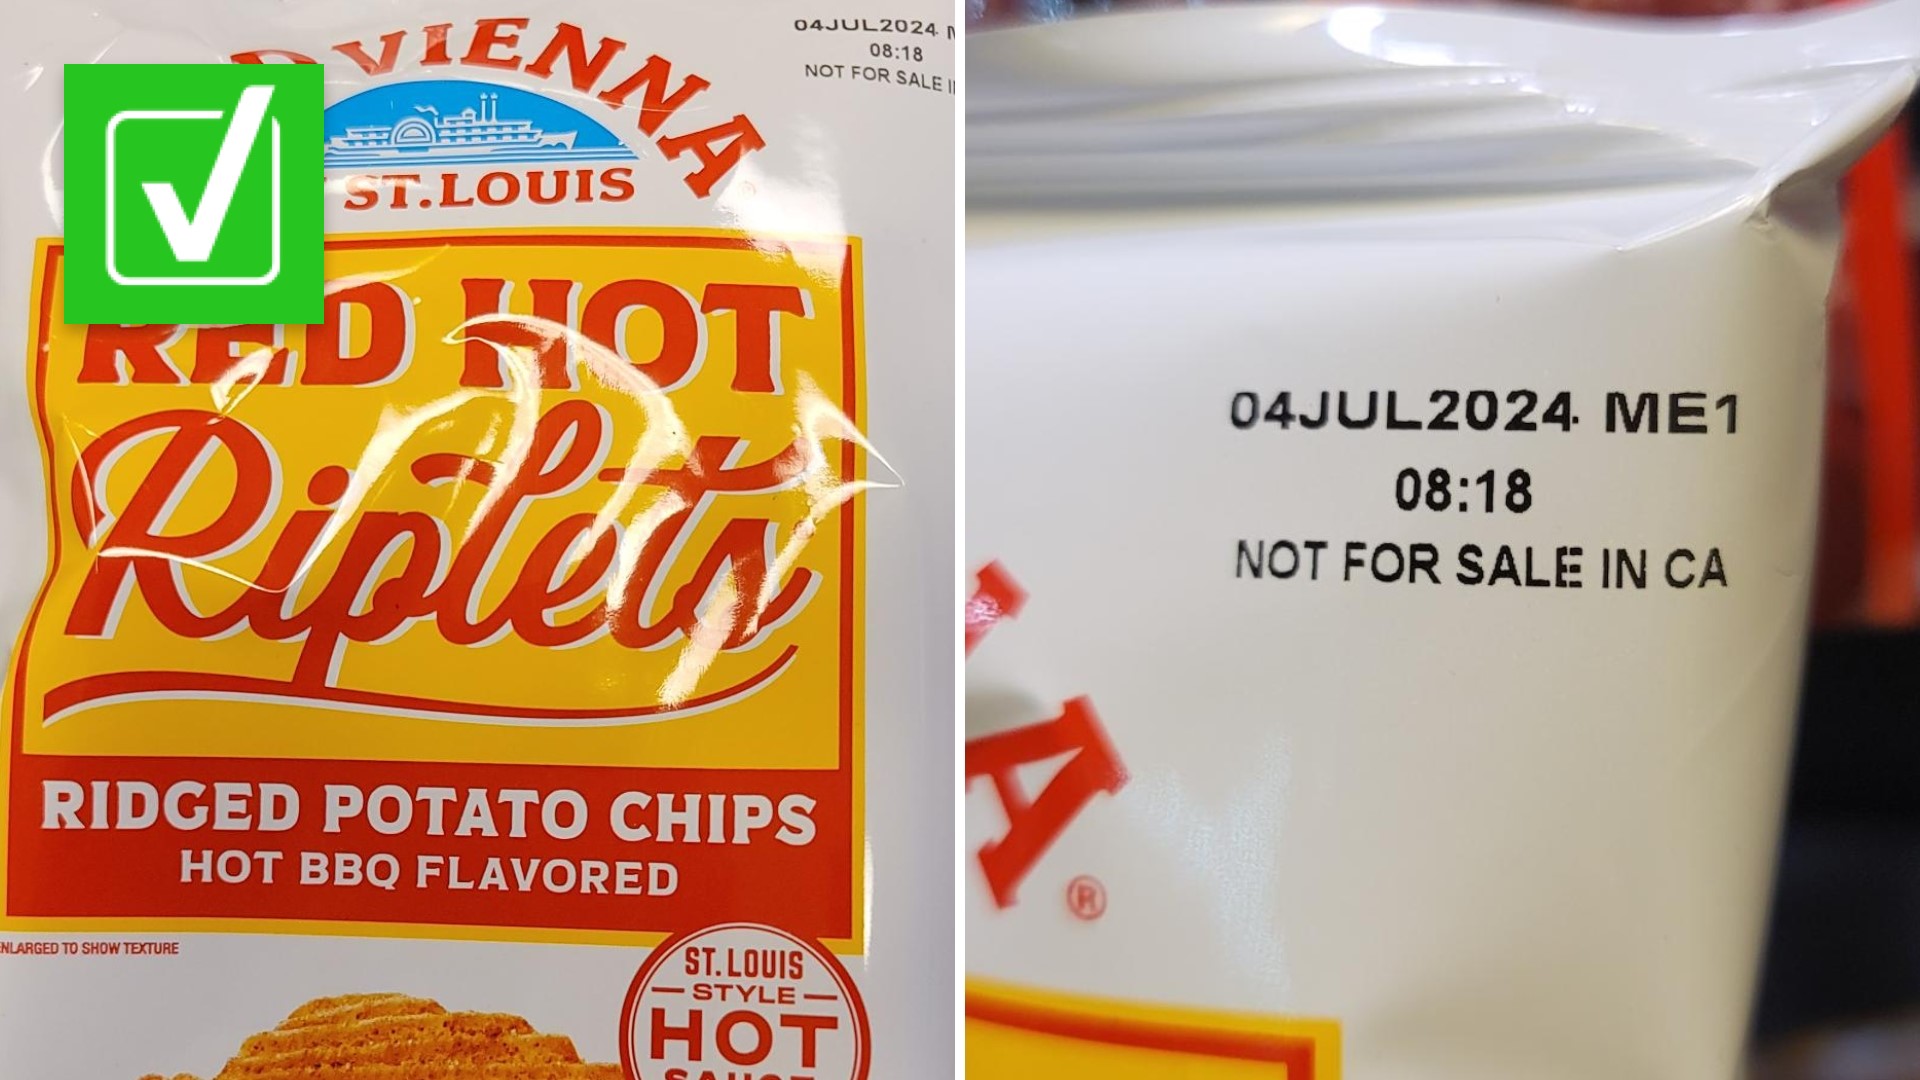 The state requires all foodstuffs that have certain chemicals to provide warning labels. The St. Louis chip maker refused to add the warning to its bags.